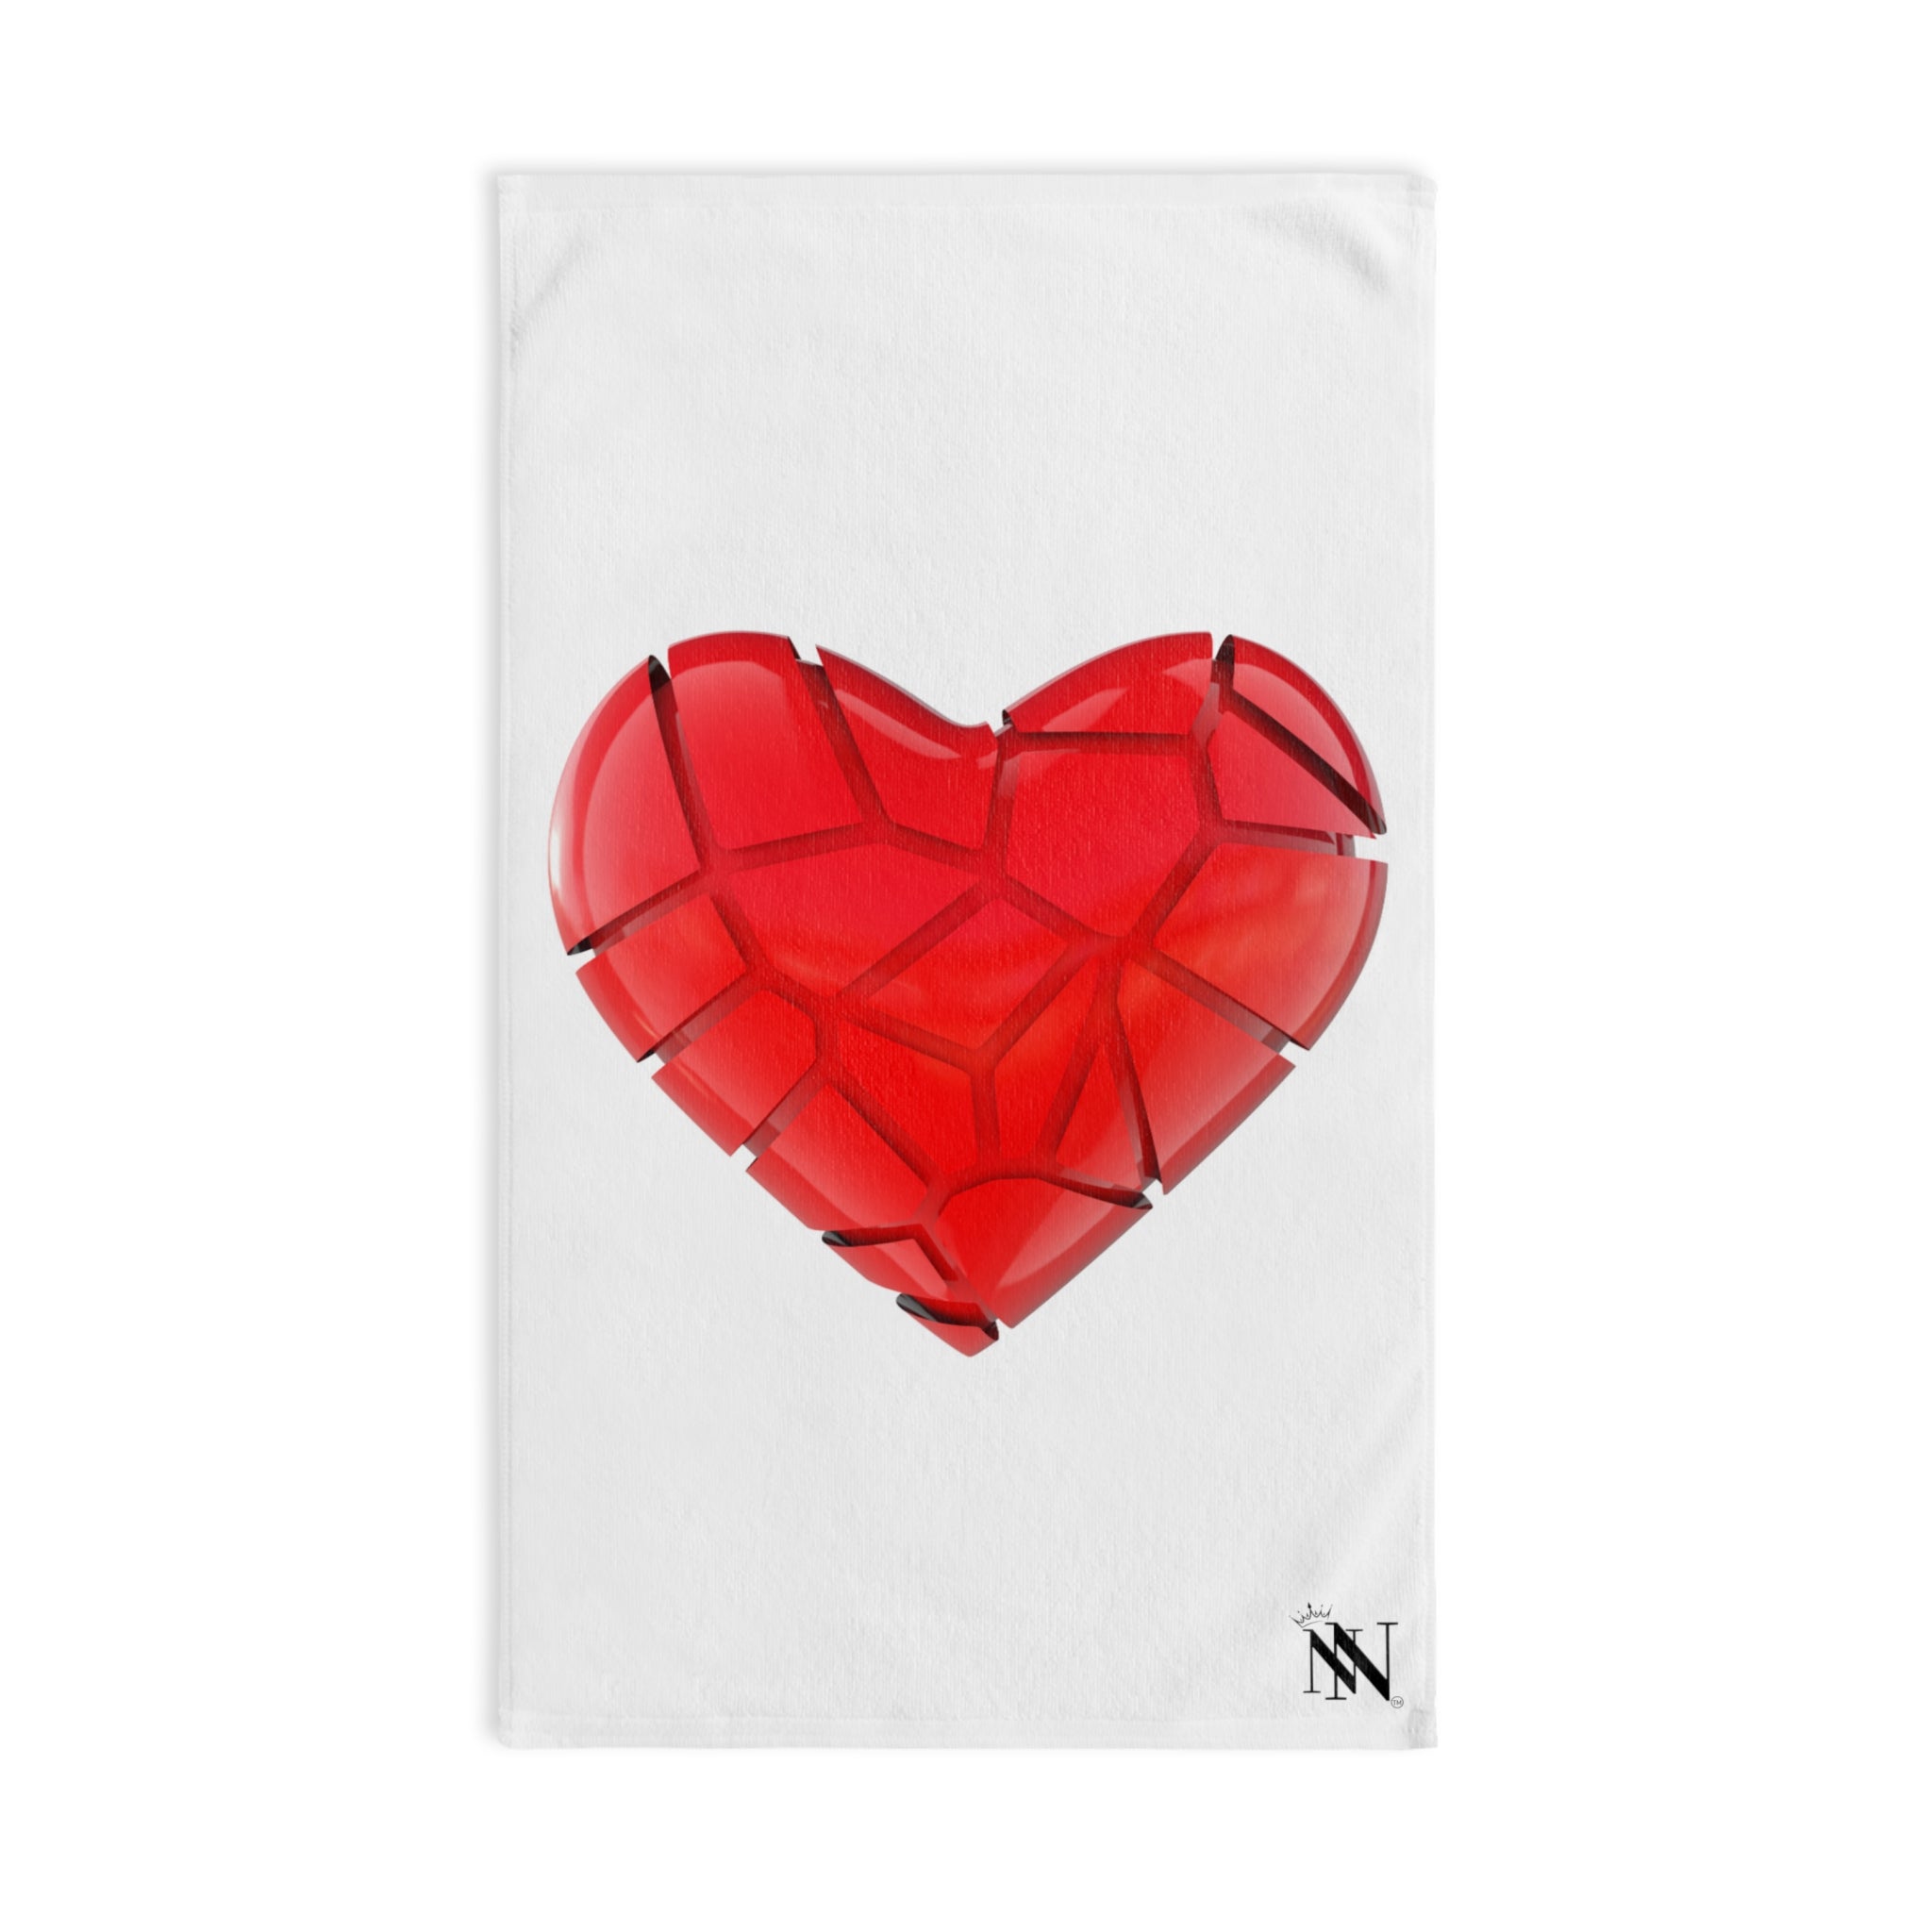 Puzzle Broken Heart White | Funny Gifts for Men - Gifts for Him - Birthday Gifts for Men, Him, Her, Husband, Boyfriend, Girlfriend, New Couple Gifts, Fathers & Valentines Day Gifts, Christmas Gifts NECTAR NAPKINS